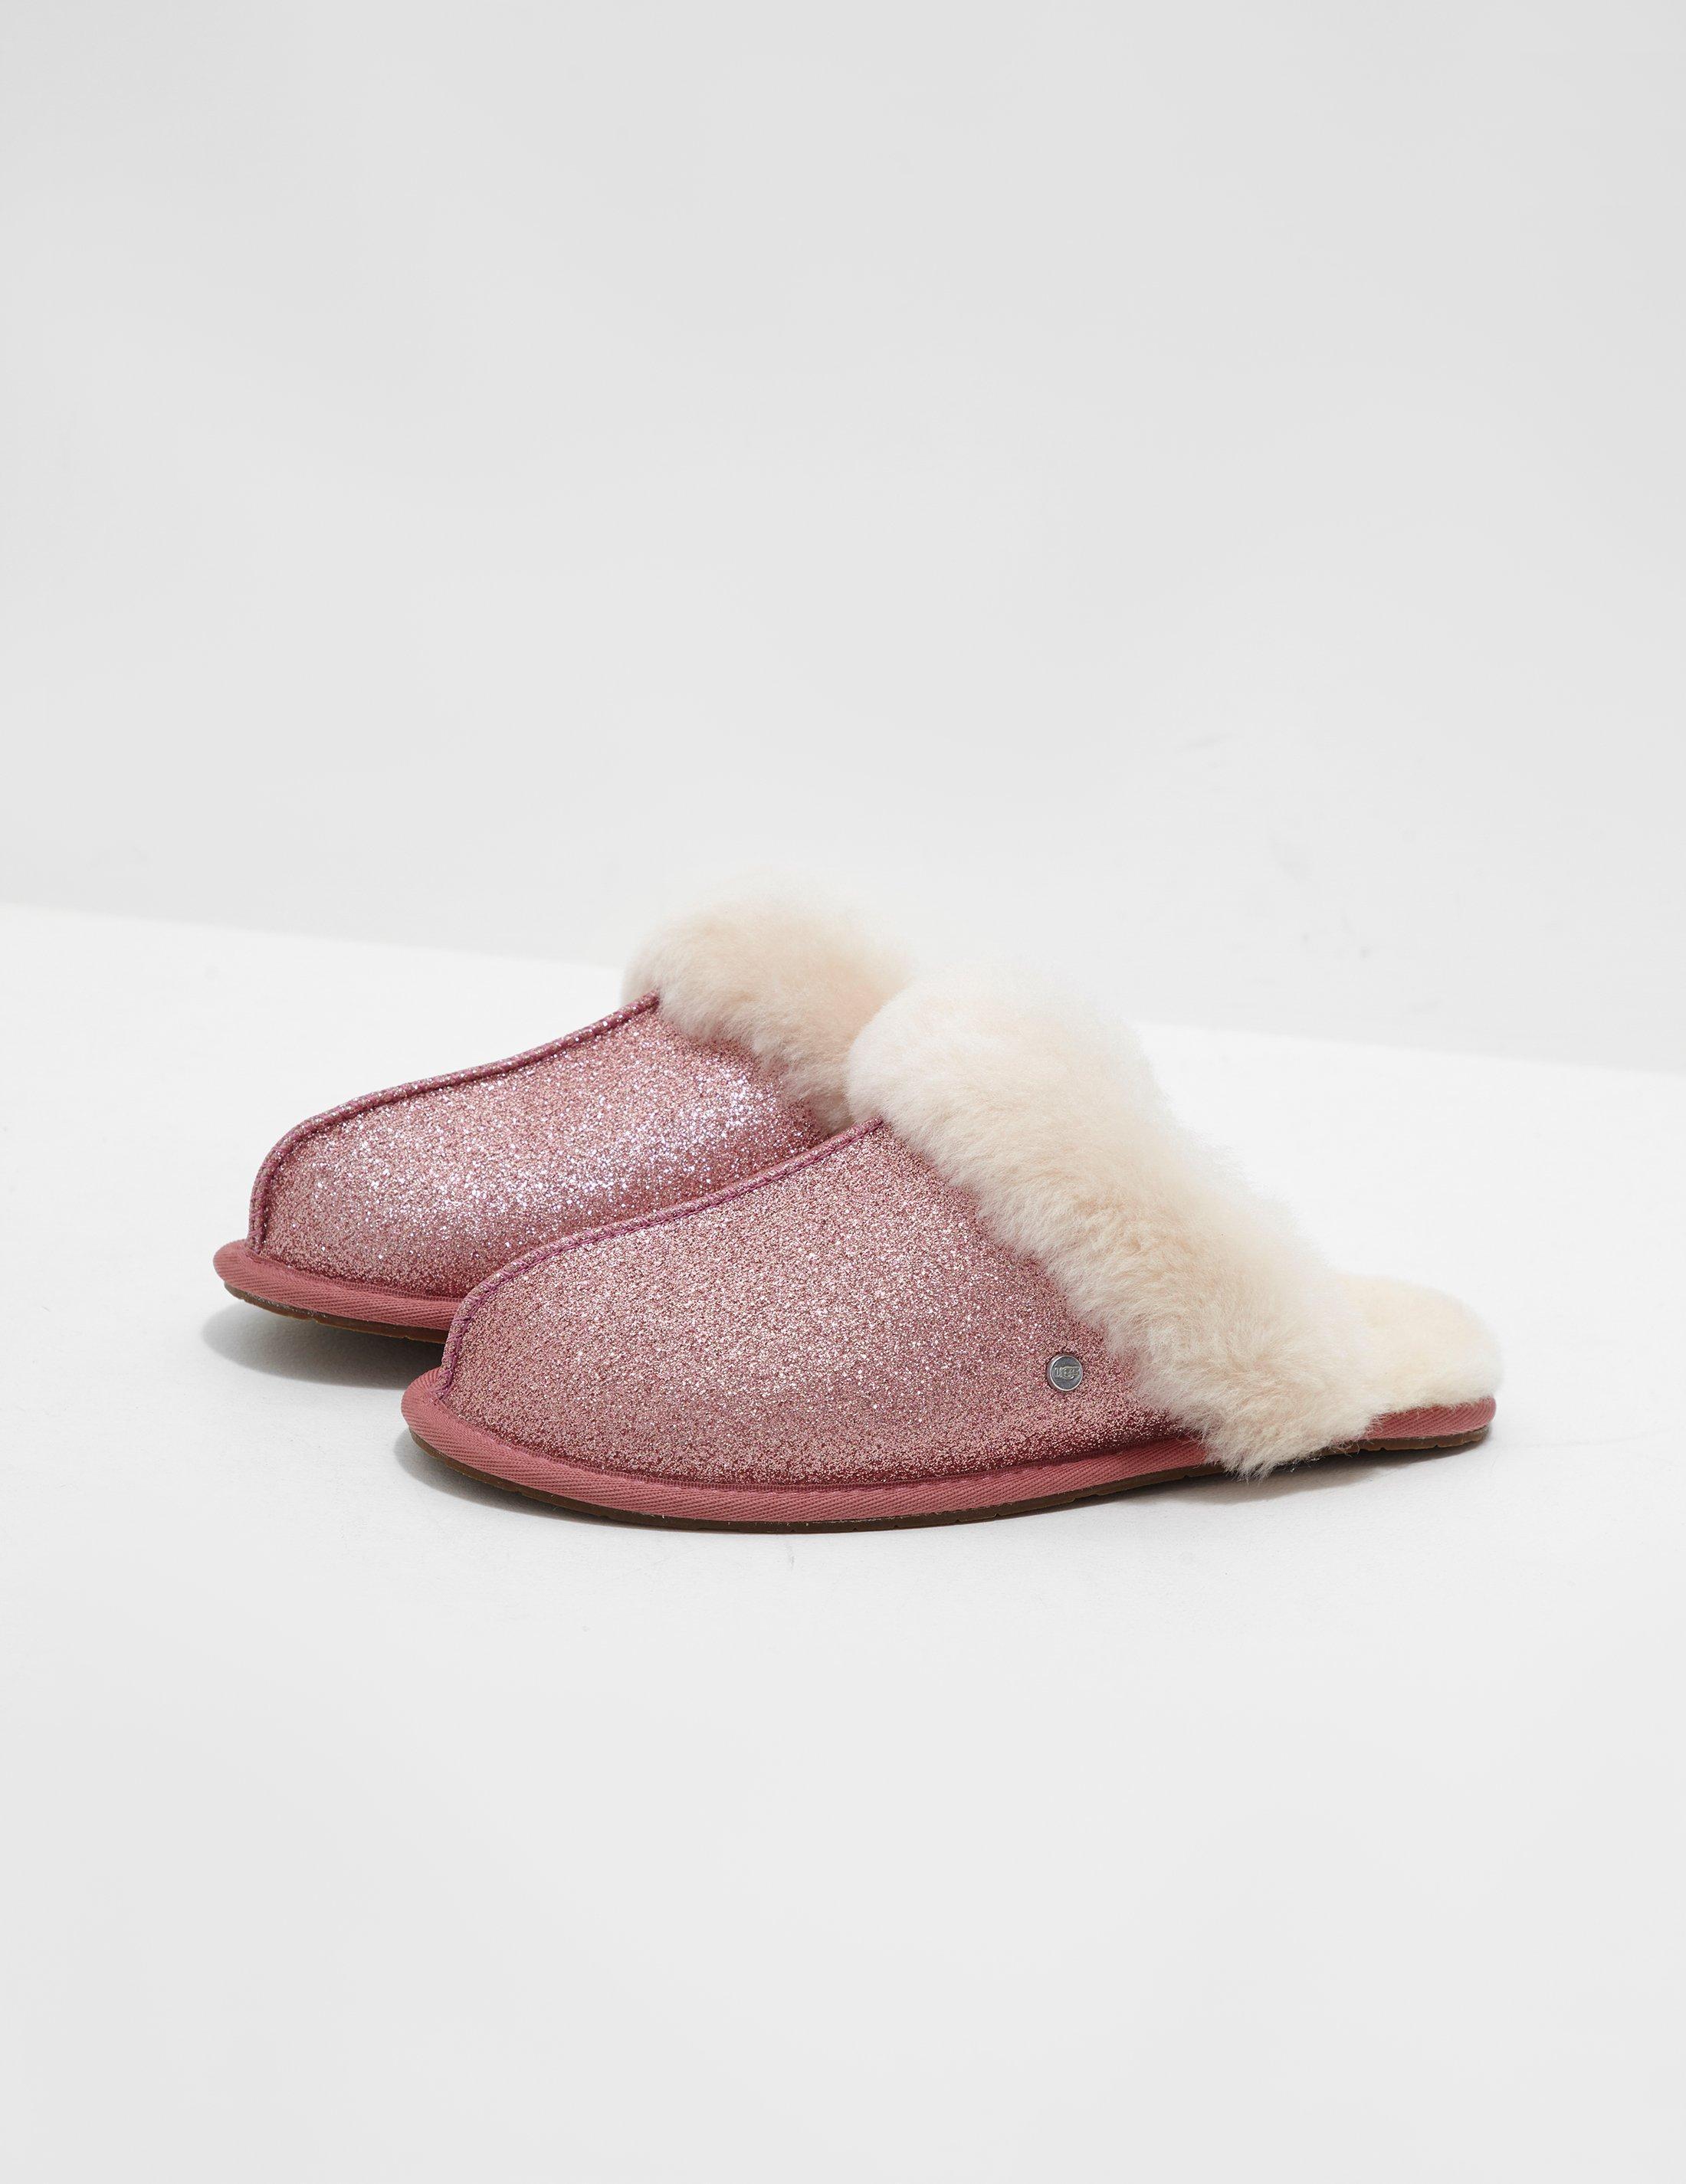 Pink Glitter Ugg Slippers Germany, SAVE 38% - aveclumiere.com